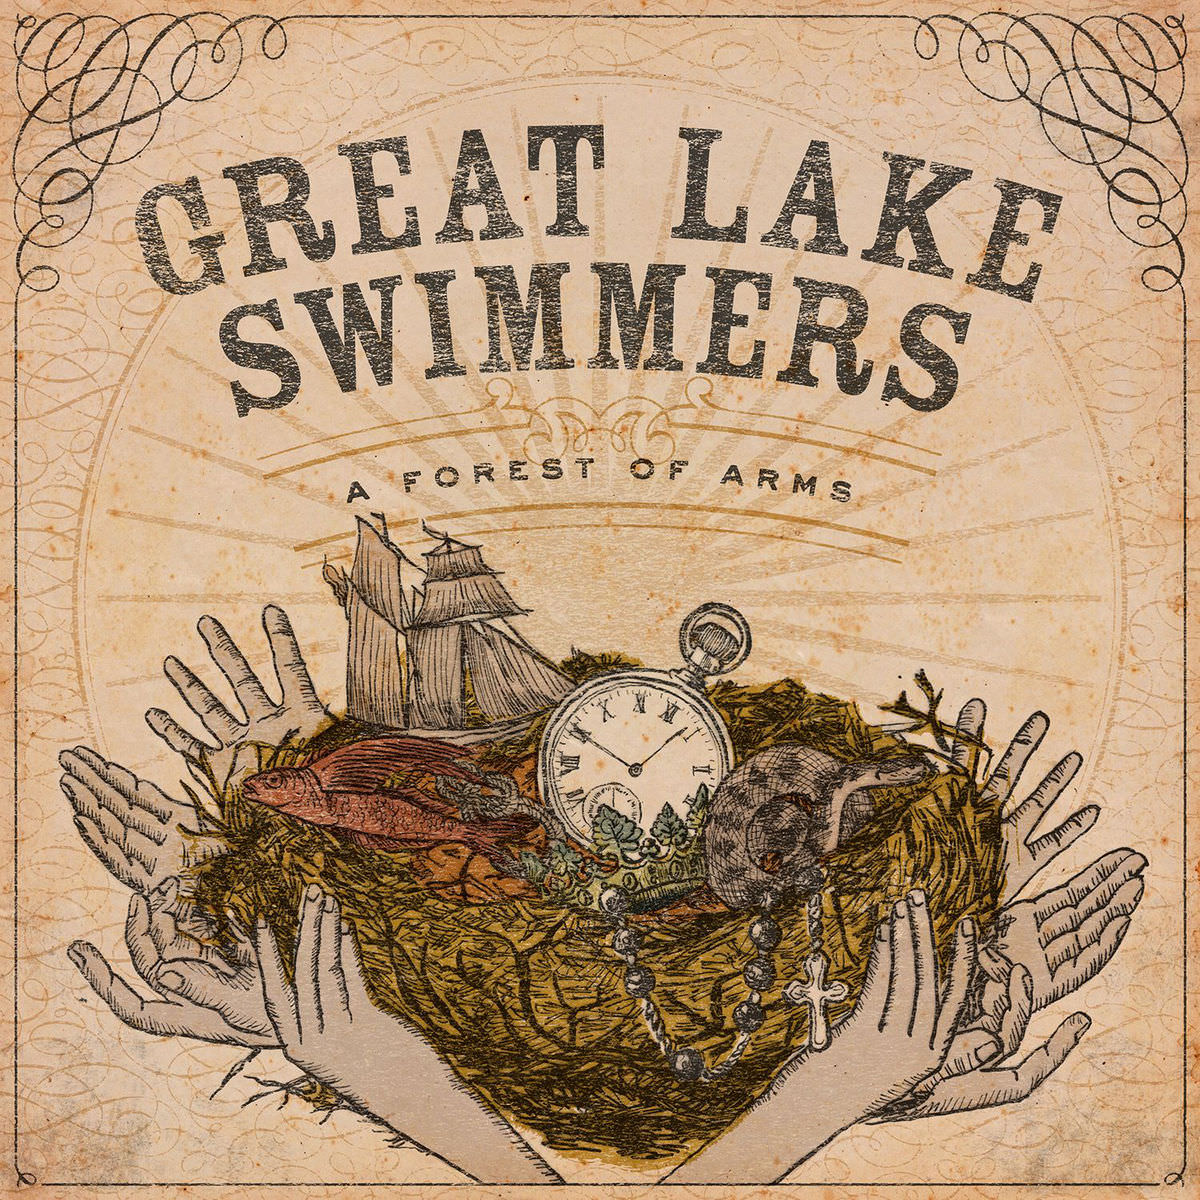 Great Lake Swimmers - A Forest of Arms (2015) [FLAC 24bit/96kHz]